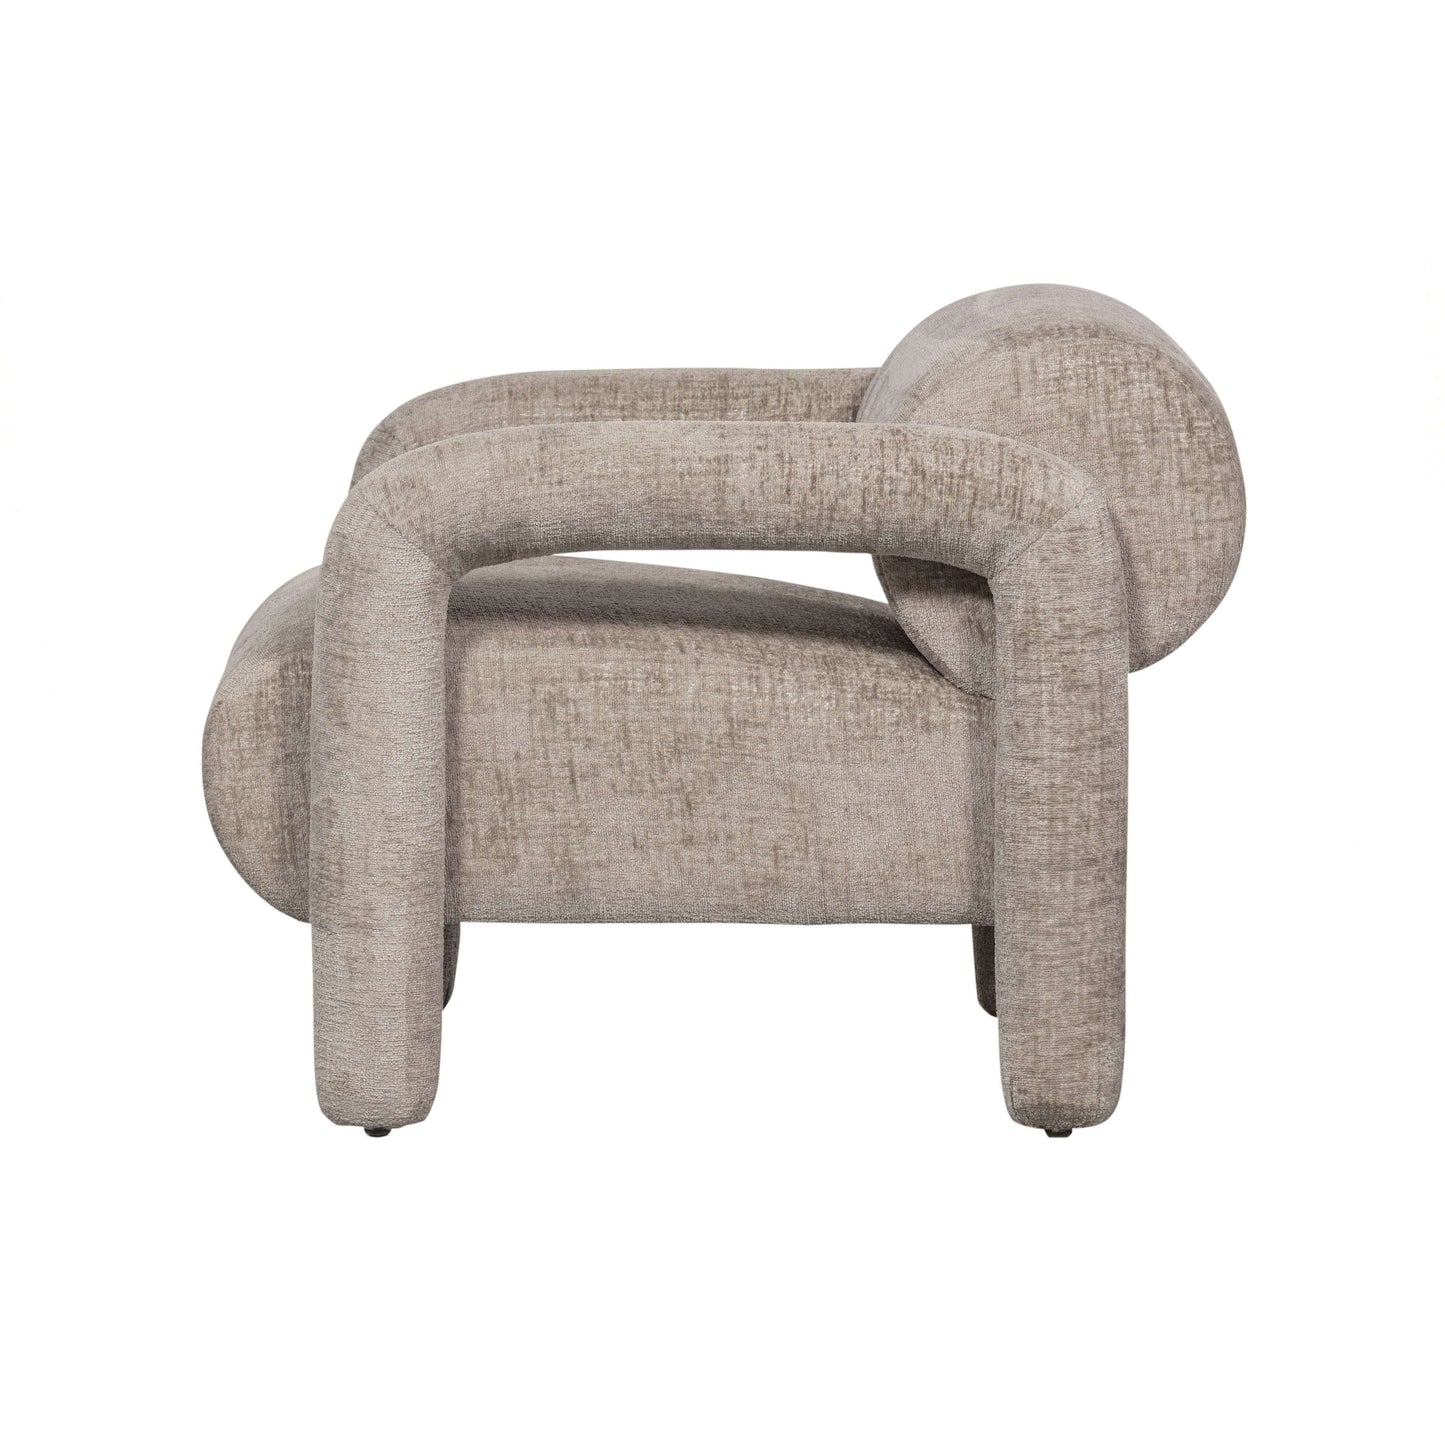 WOOOD Exclusive Lenny fauteuil grove textuur sand